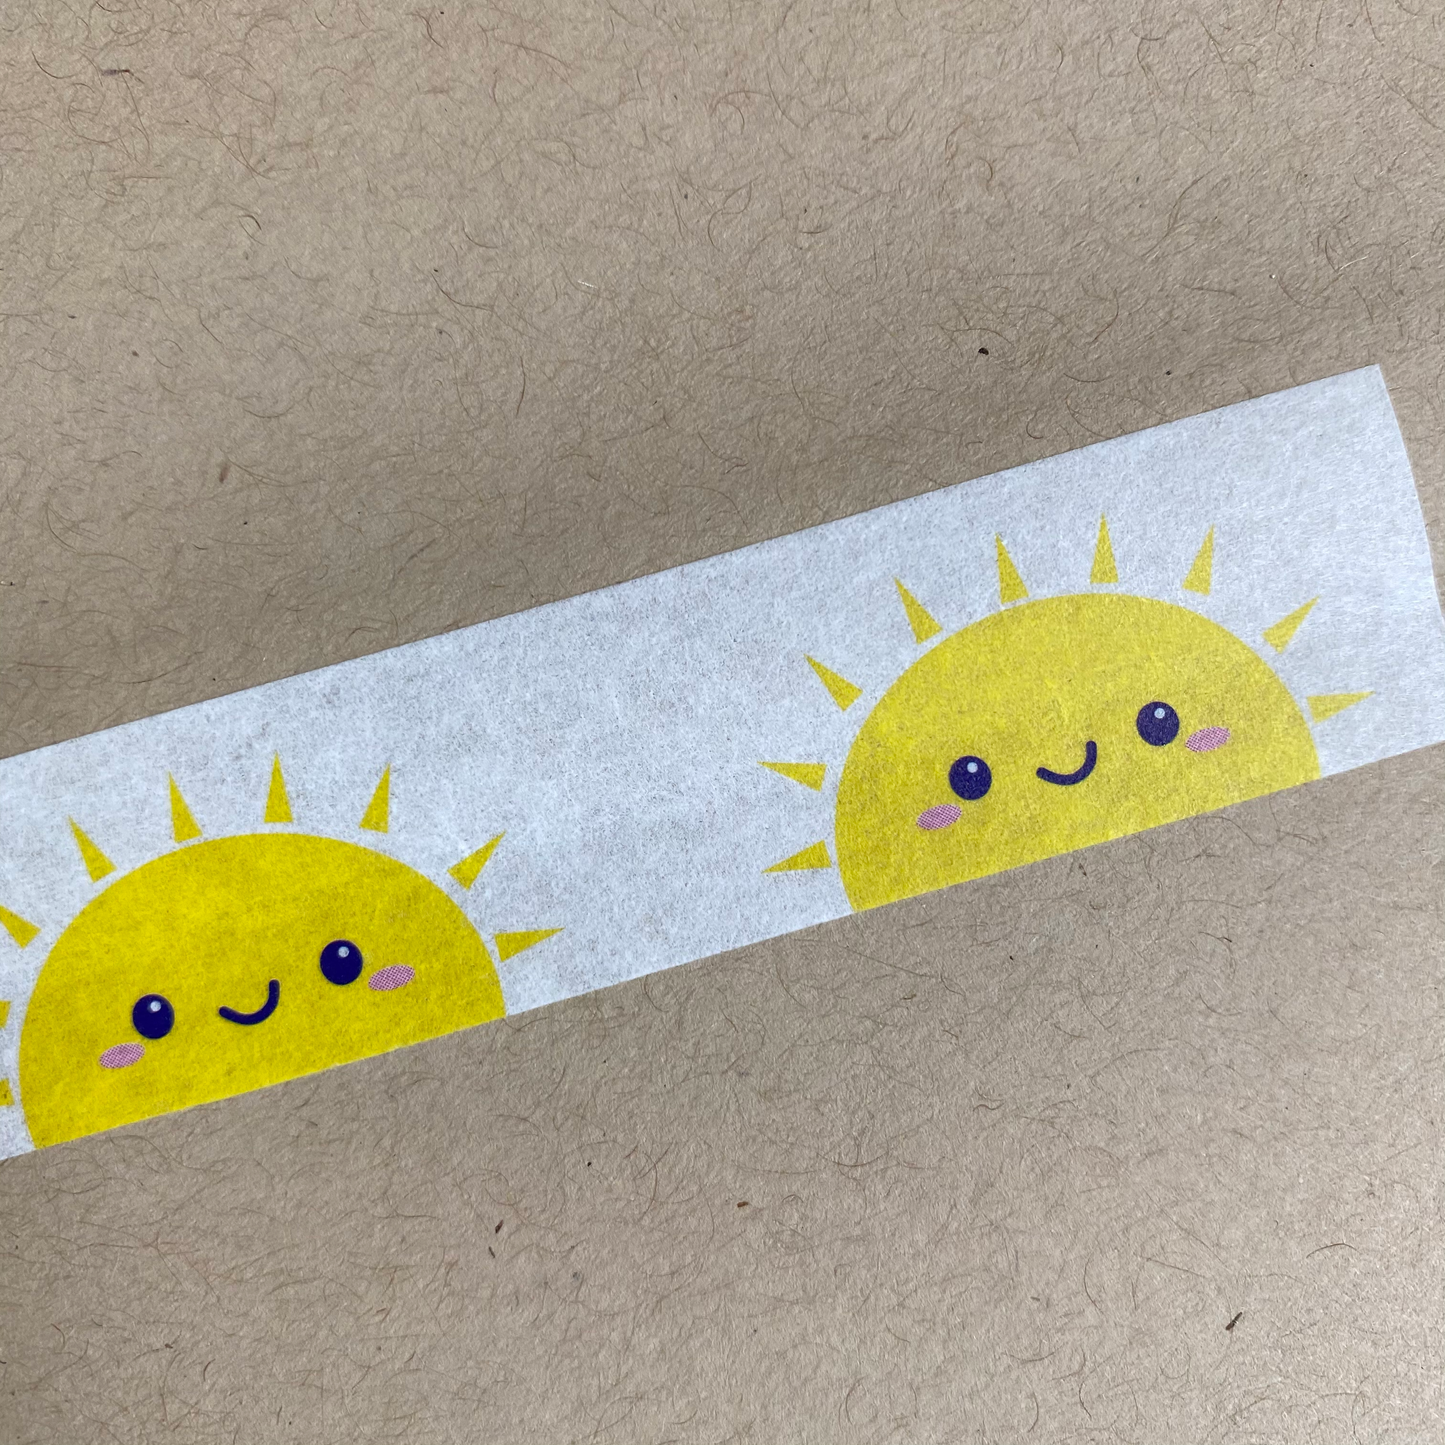 Cute Sunshine Washi Tape - Planner Flair - Bullet Journal Decoration - Paper Tape